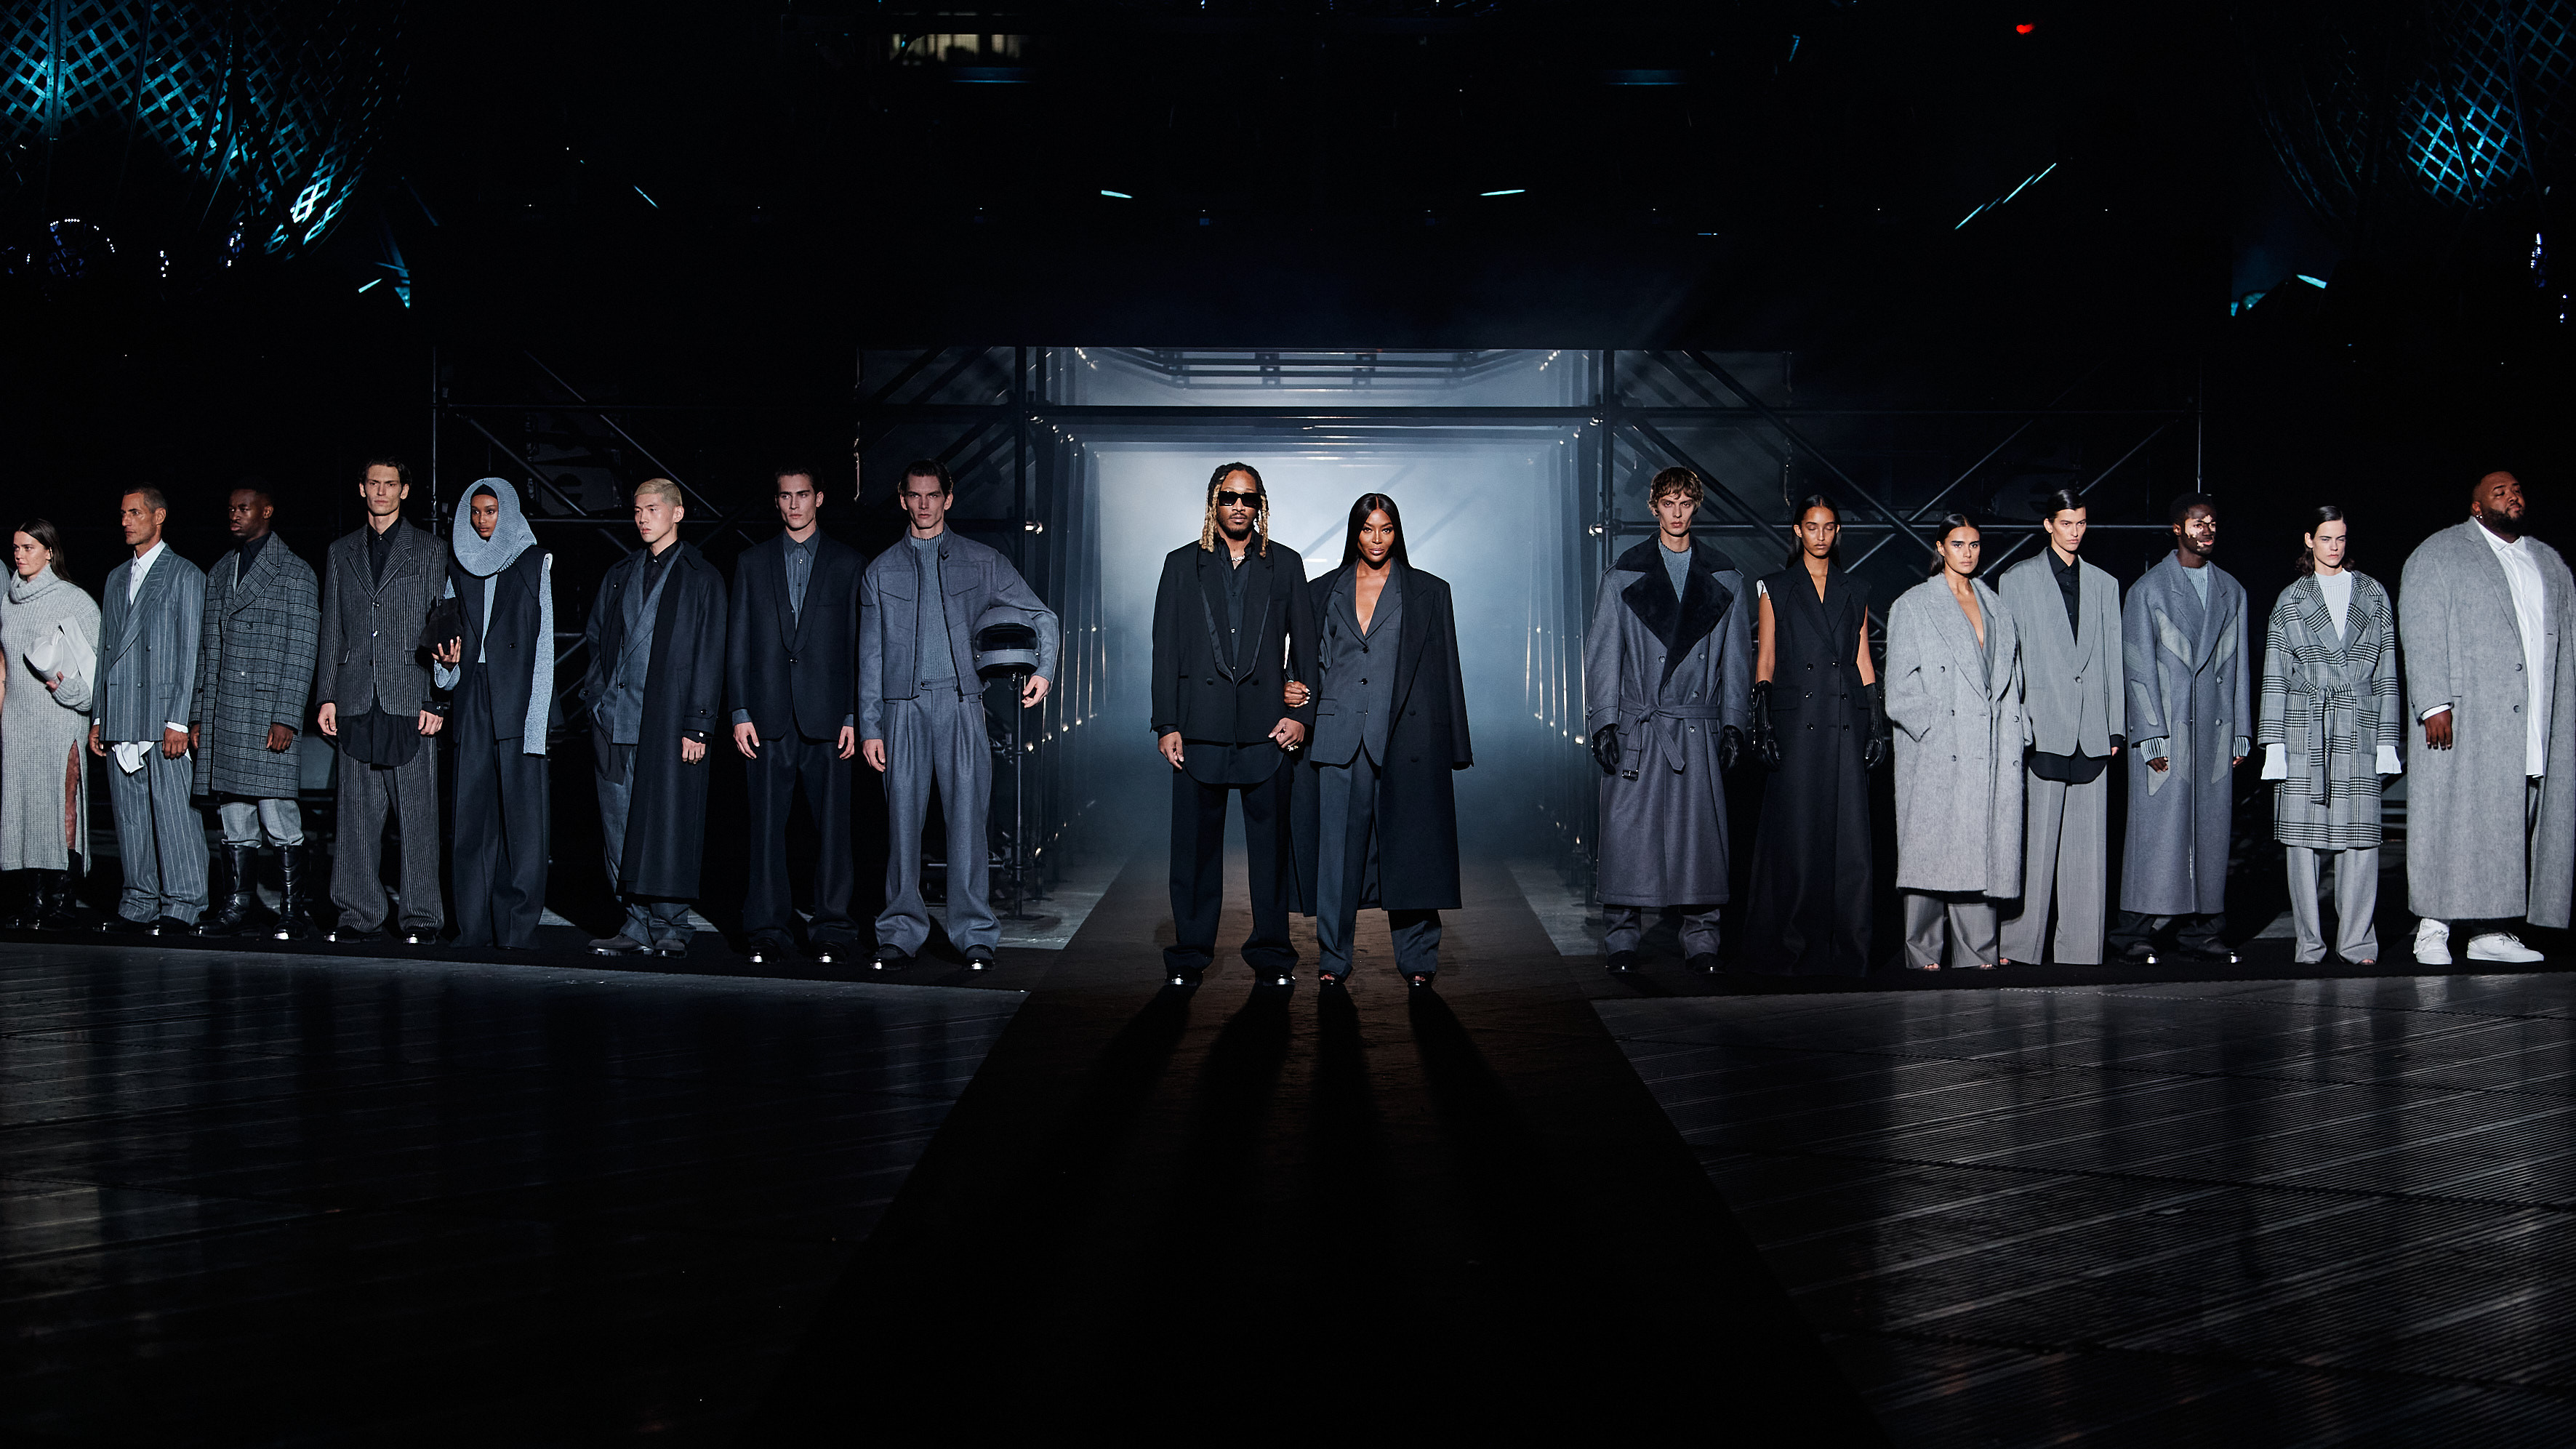 HUGO BOSS Group: BOSS REVEALS FALL/WINTER 2022 COLLECTION AT STAR-STUDDED  SHOW IN MILAN